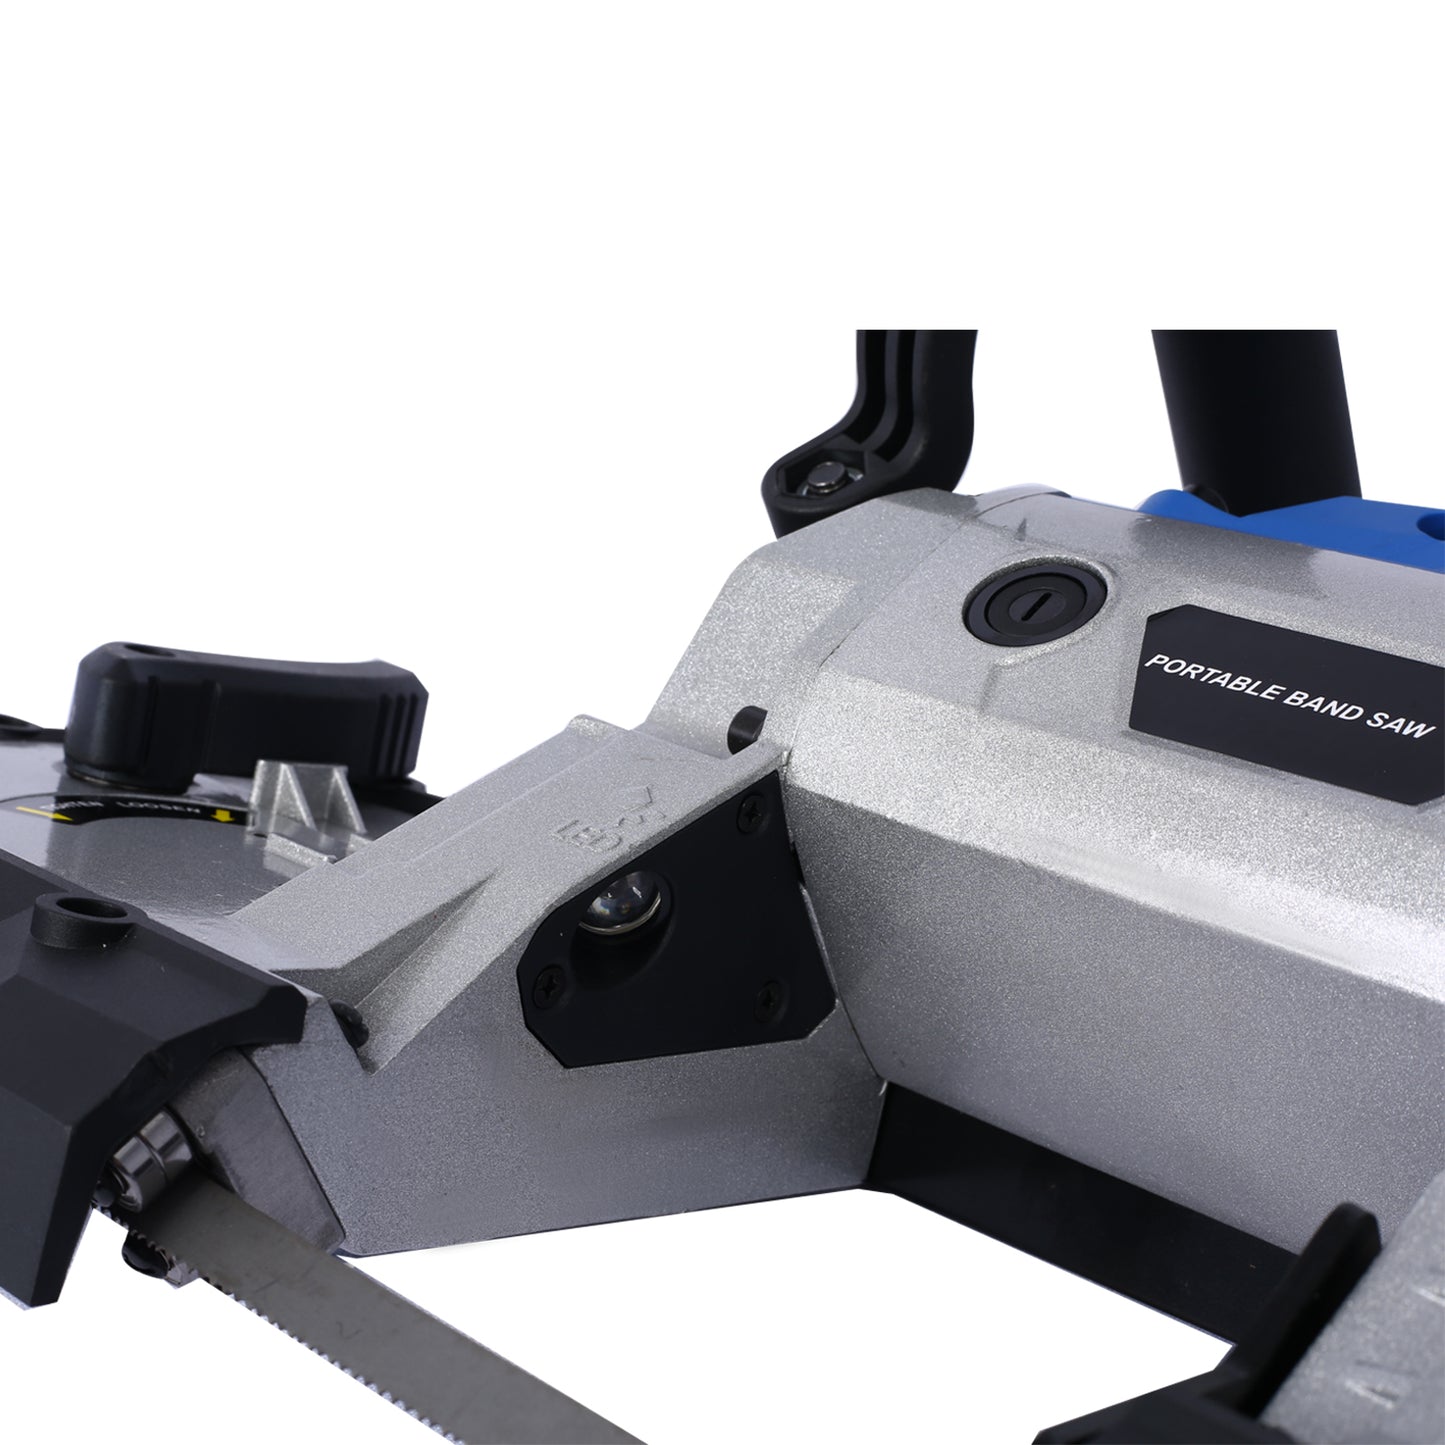 High-Performance Portable Band Saw with Removable Stainless Steel Base, 45°-90° Cutting, 10A 1100W Motor, 5-inch Depth Cut,